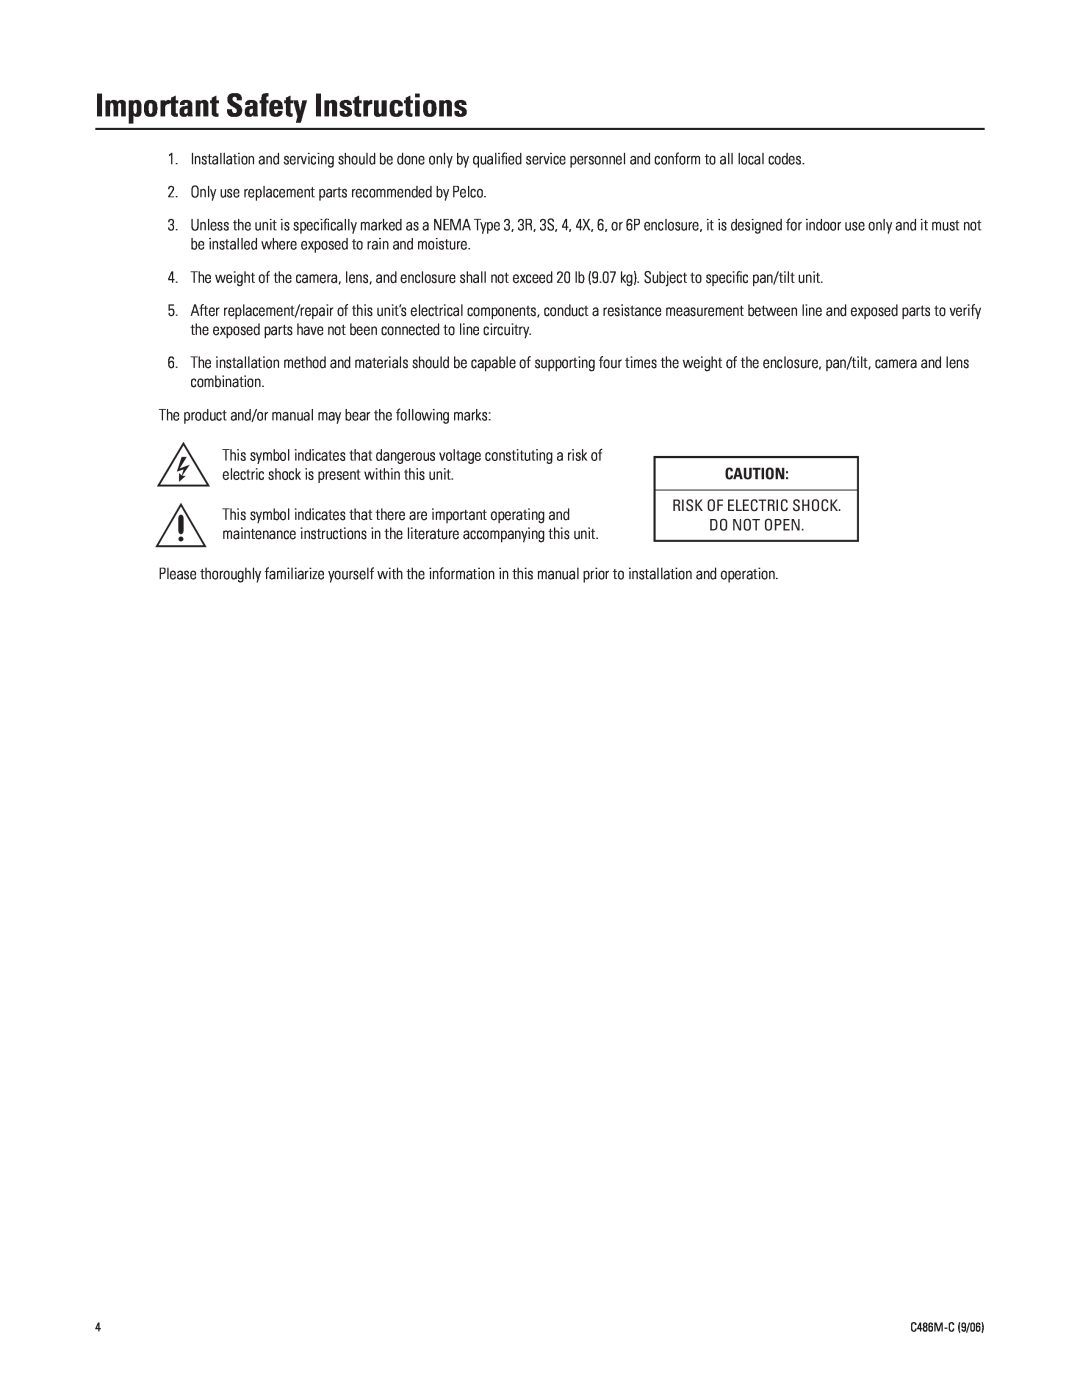 Pelco hs2500 manual Important Safety Instructions 